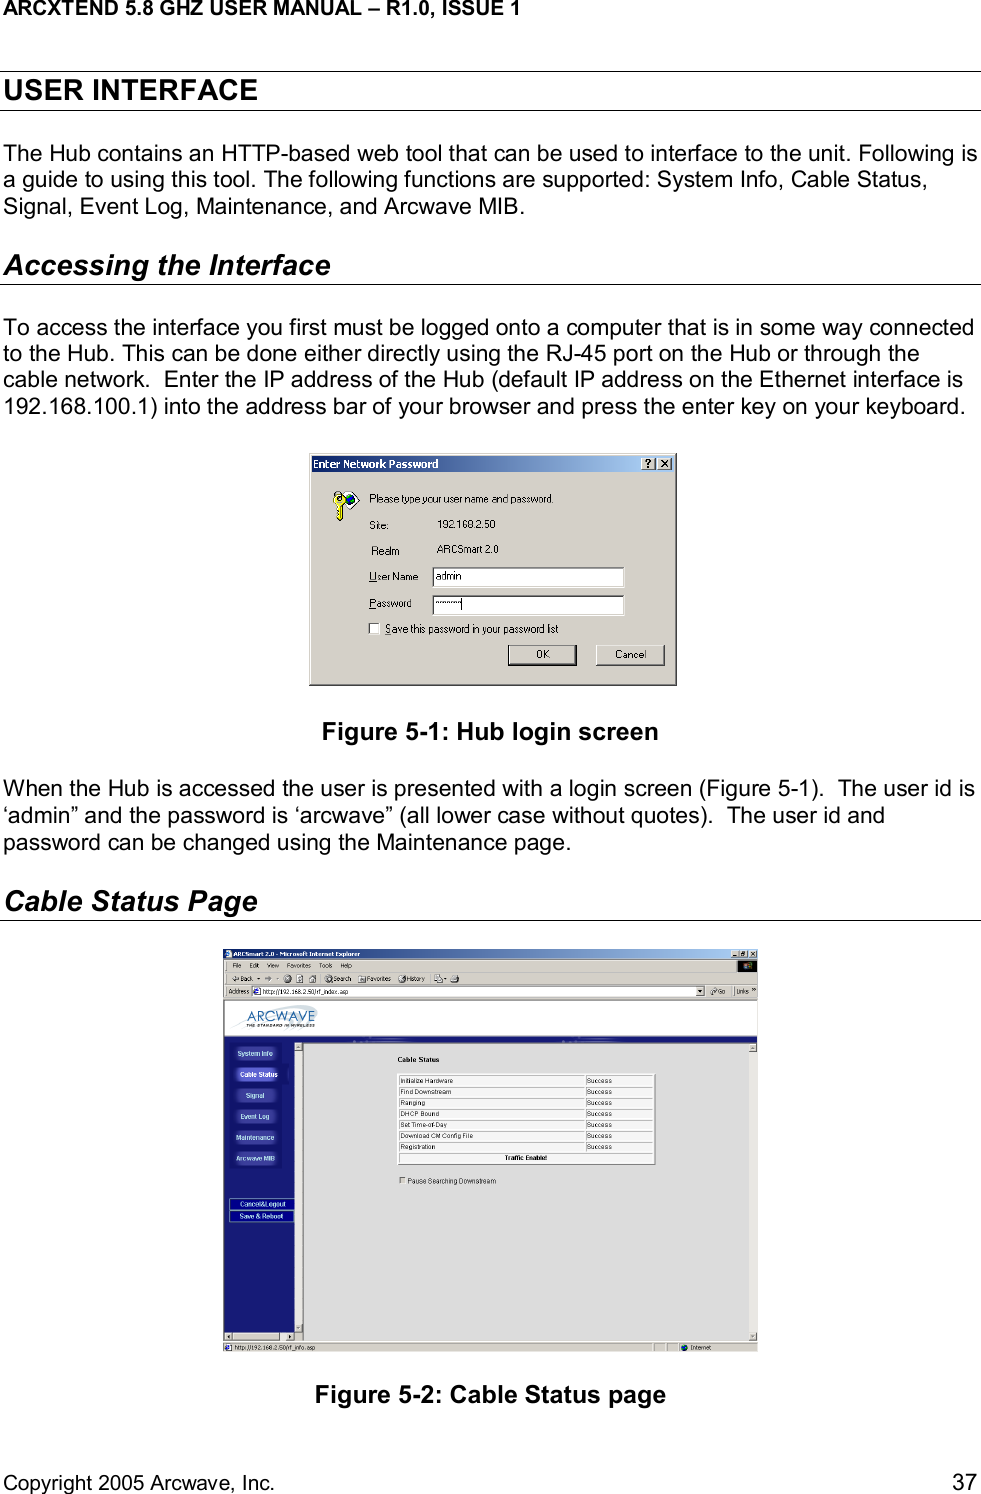 ARCXTEND 5.8 GHZ USER MANUAL – R1.0, ISSUE 1  Copyright 2005 Arcwave, Inc.    37 USER INTERFACE  The Hub contains an HTTP-based web tool that can be used to interface to the unit. Following is a guide to using this tool. The following functions are supported: System Info, Cable Status, Signal, Event Log, Maintenance, and Arcwave MIB. Accessing the Interface To access the interface you first must be logged onto a computer that is in some way connected to the Hub. This can be done either directly using the RJ-45 port on the Hub or through the cable network.  Enter the IP address of the Hub (default IP address on the Ethernet interface is 192.168.100.1) into the address bar of your browser and press the enter key on your keyboard.   Figure 5-1: Hub login screen  When the Hub is accessed the user is presented with a login screen (Figure 5-1).  The user id is ‘admin” and the password is ‘arcwave” (all lower case without quotes).  The user id and password can be changed using the Maintenance page. Cable Status Page  Figure 5-2: Cable Status page 